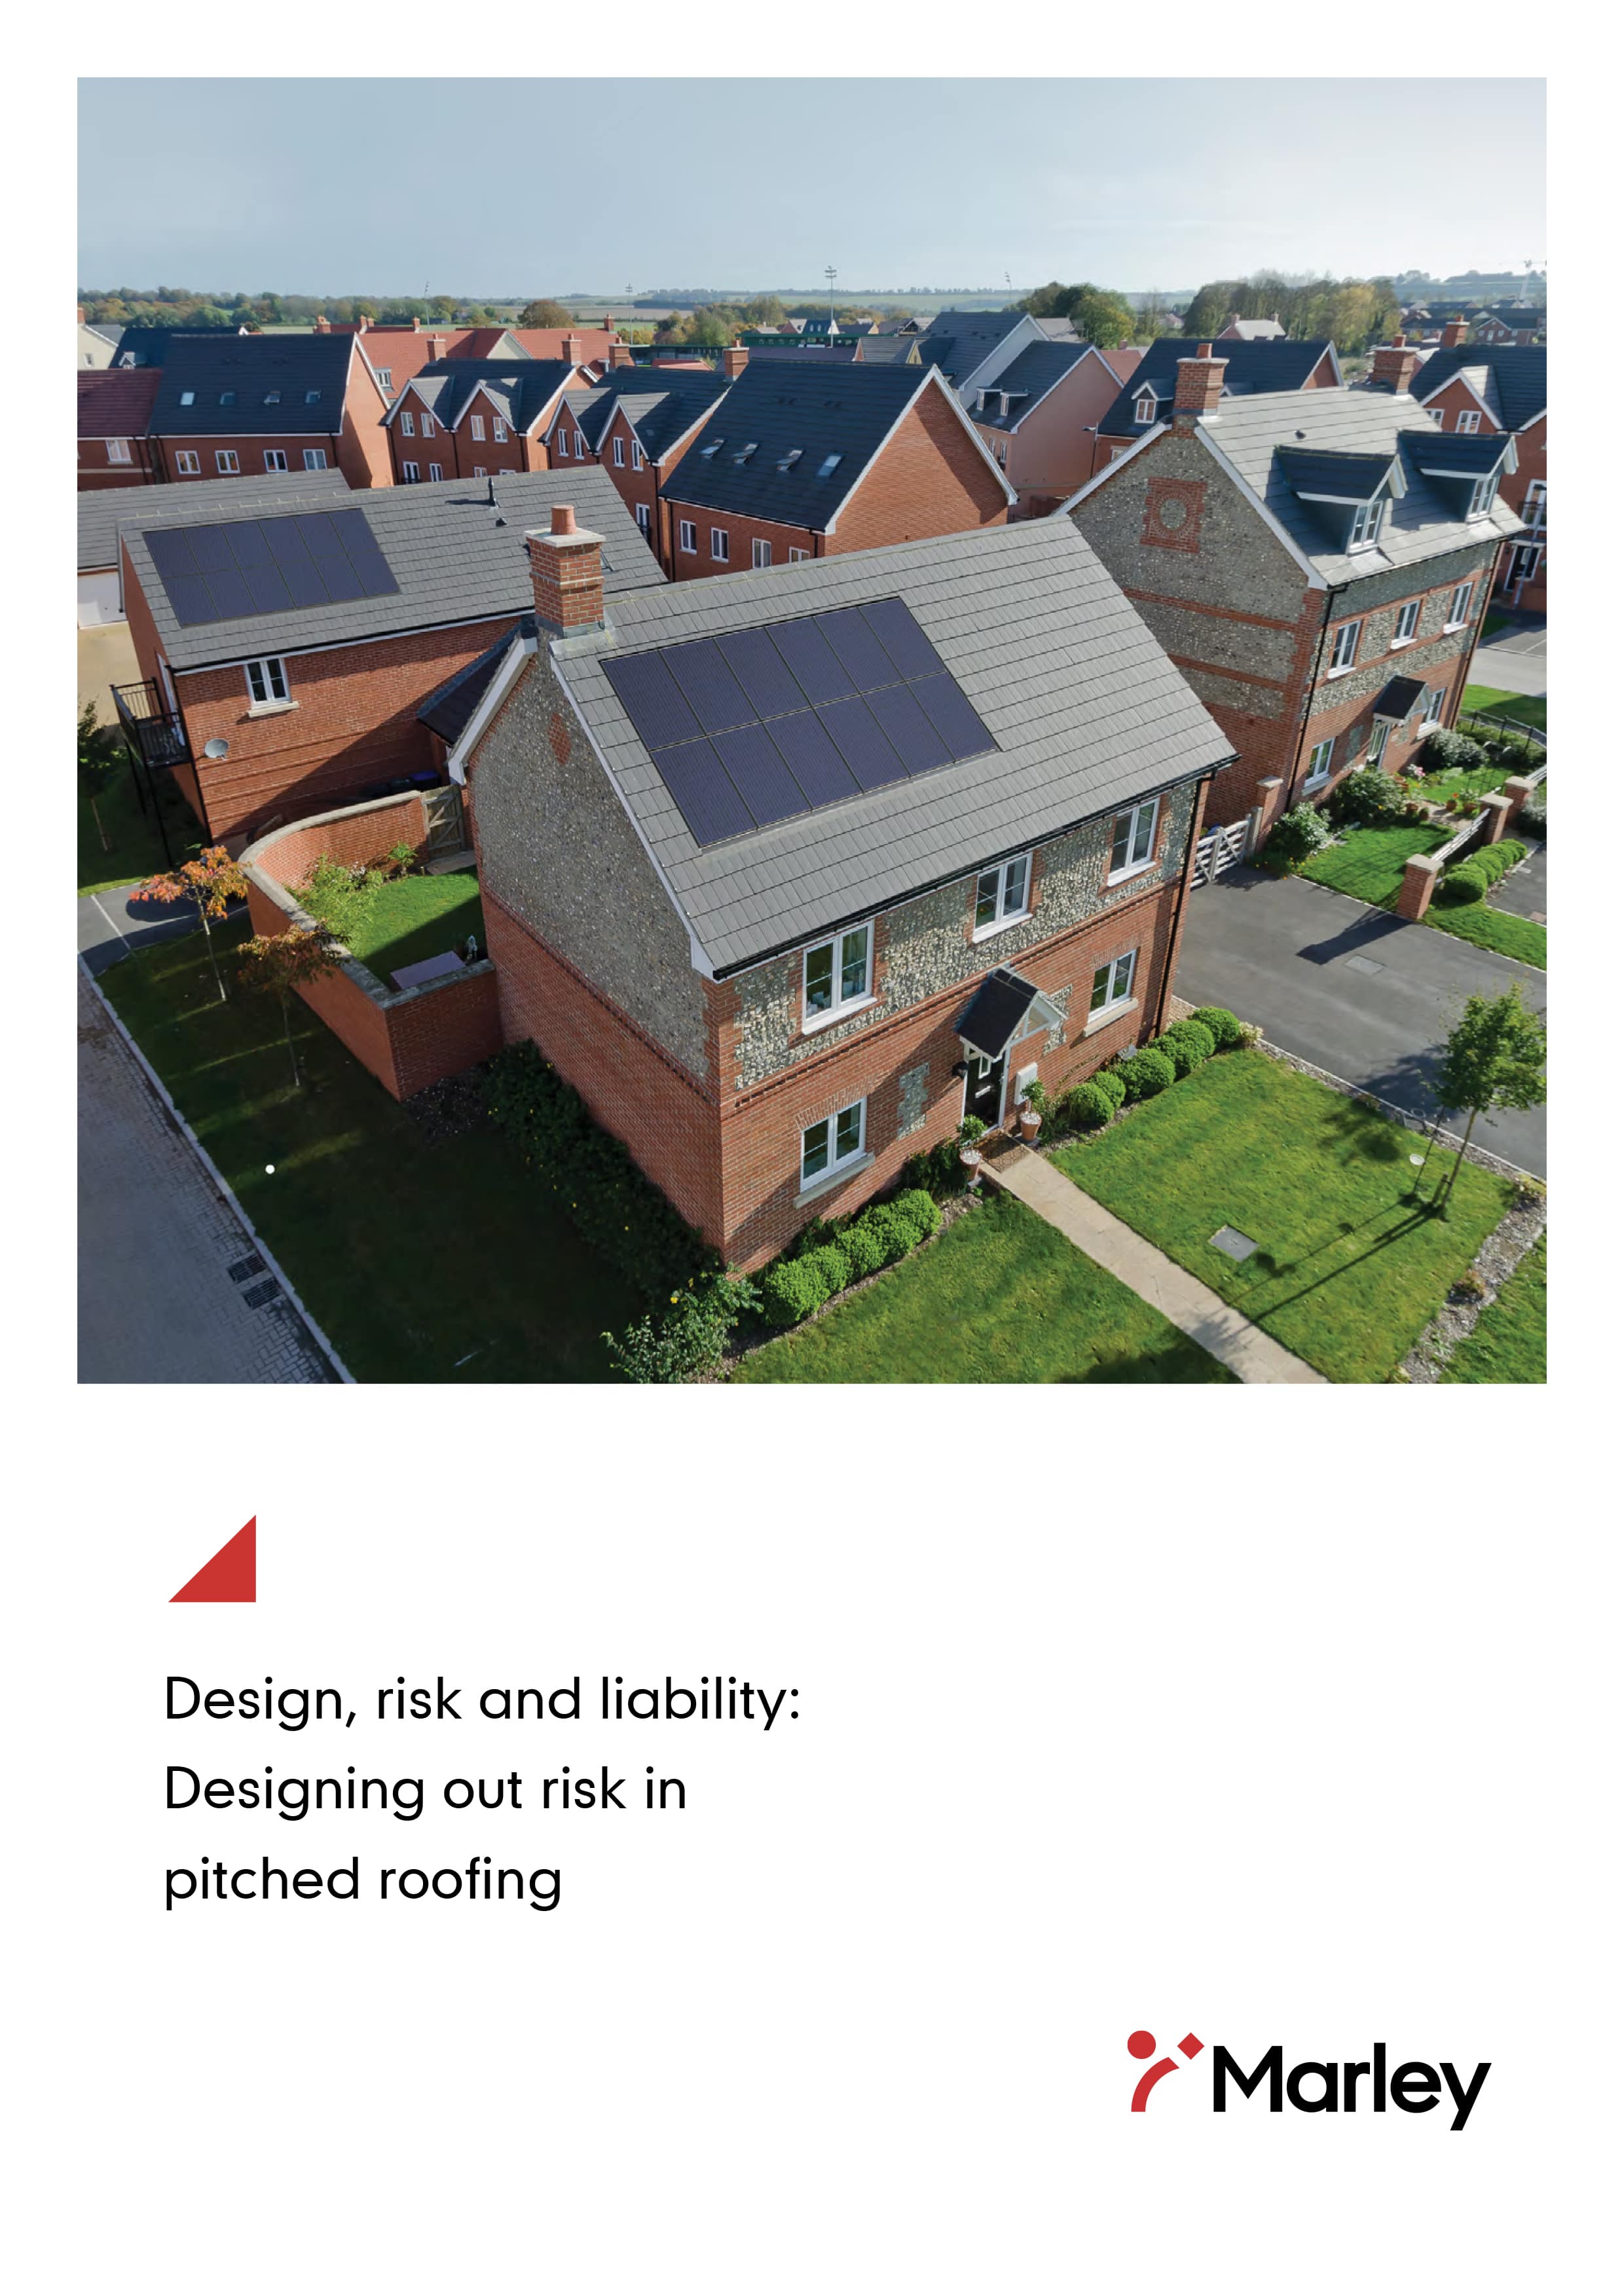 Marley whitepaper - designing the risk out of pitched roofing